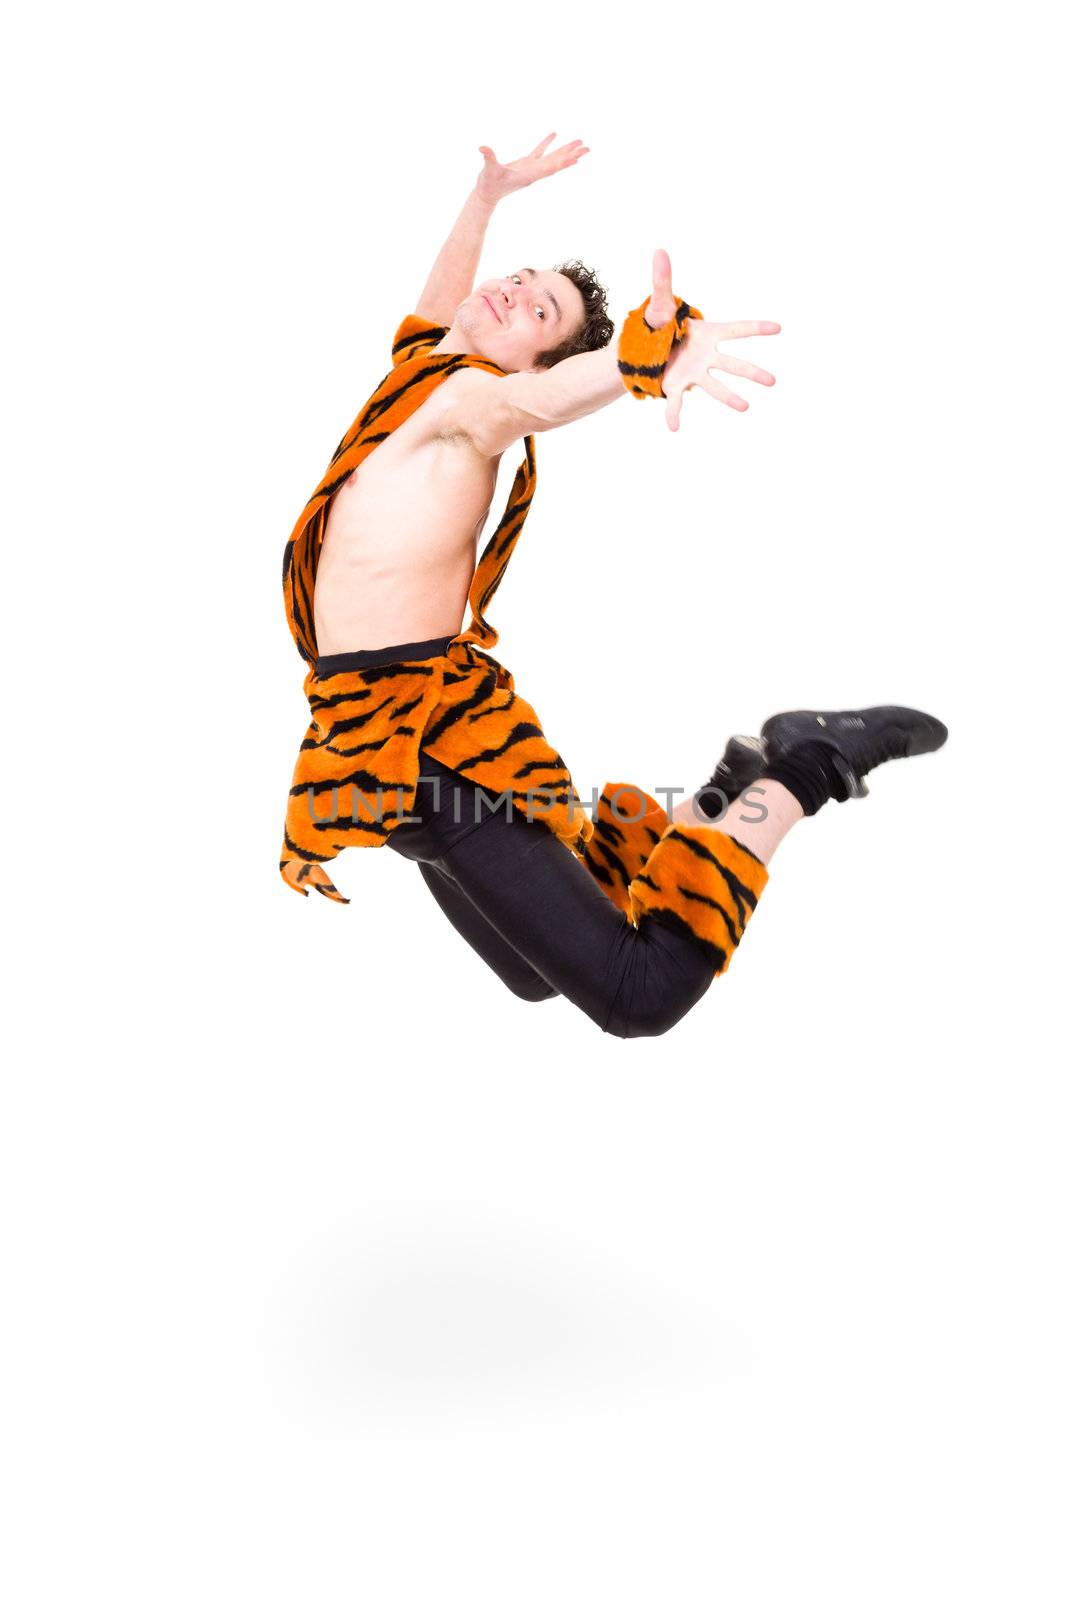 Wild man wearing a tiger fur jumping against isolated white background